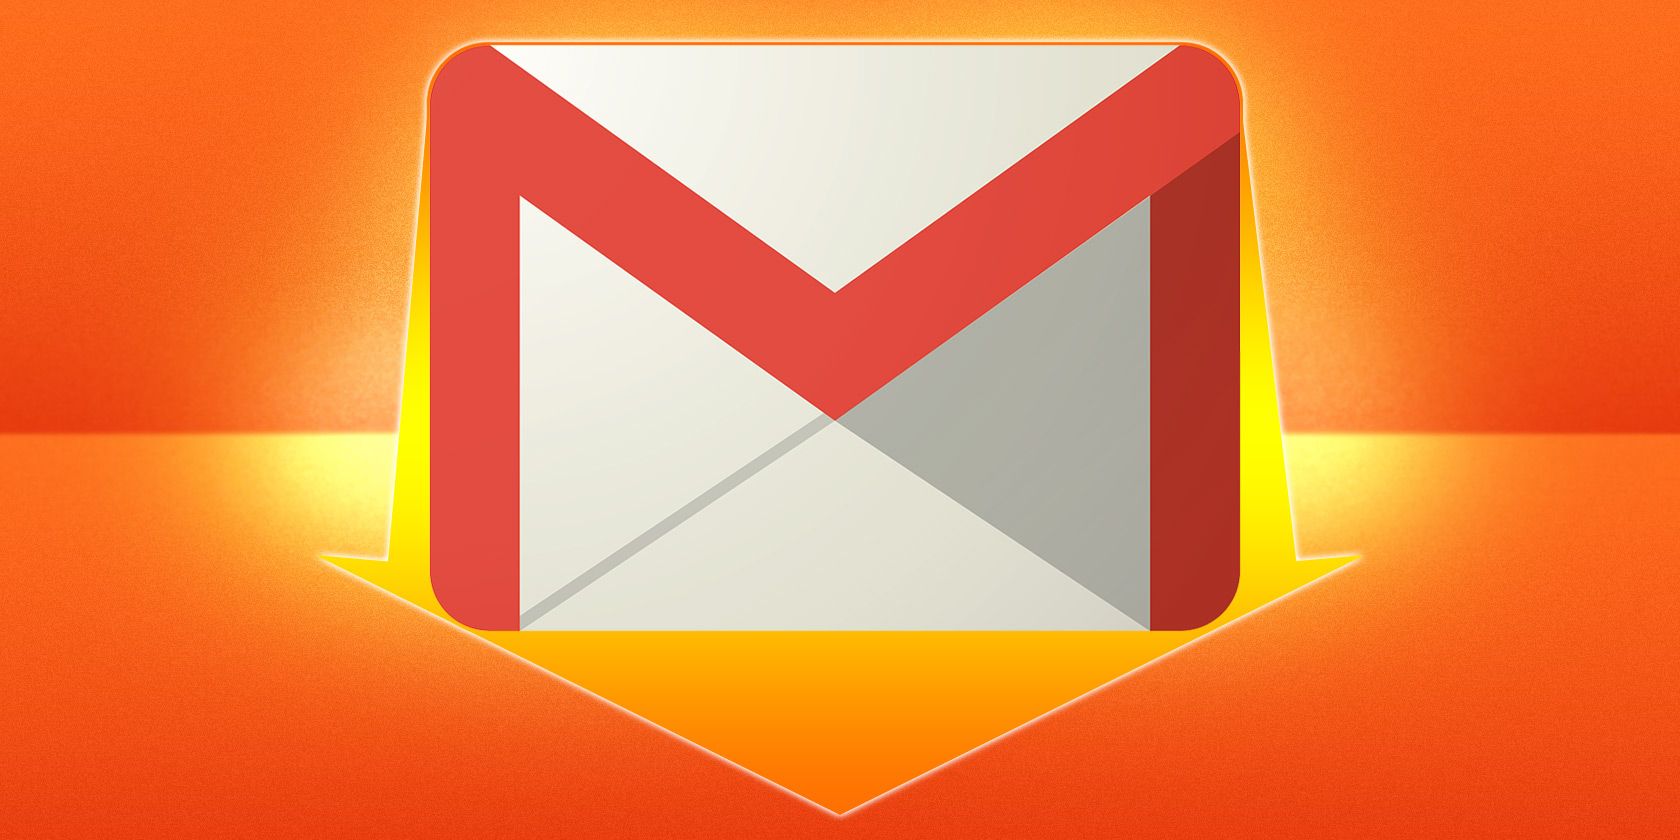 gmail logo on red background